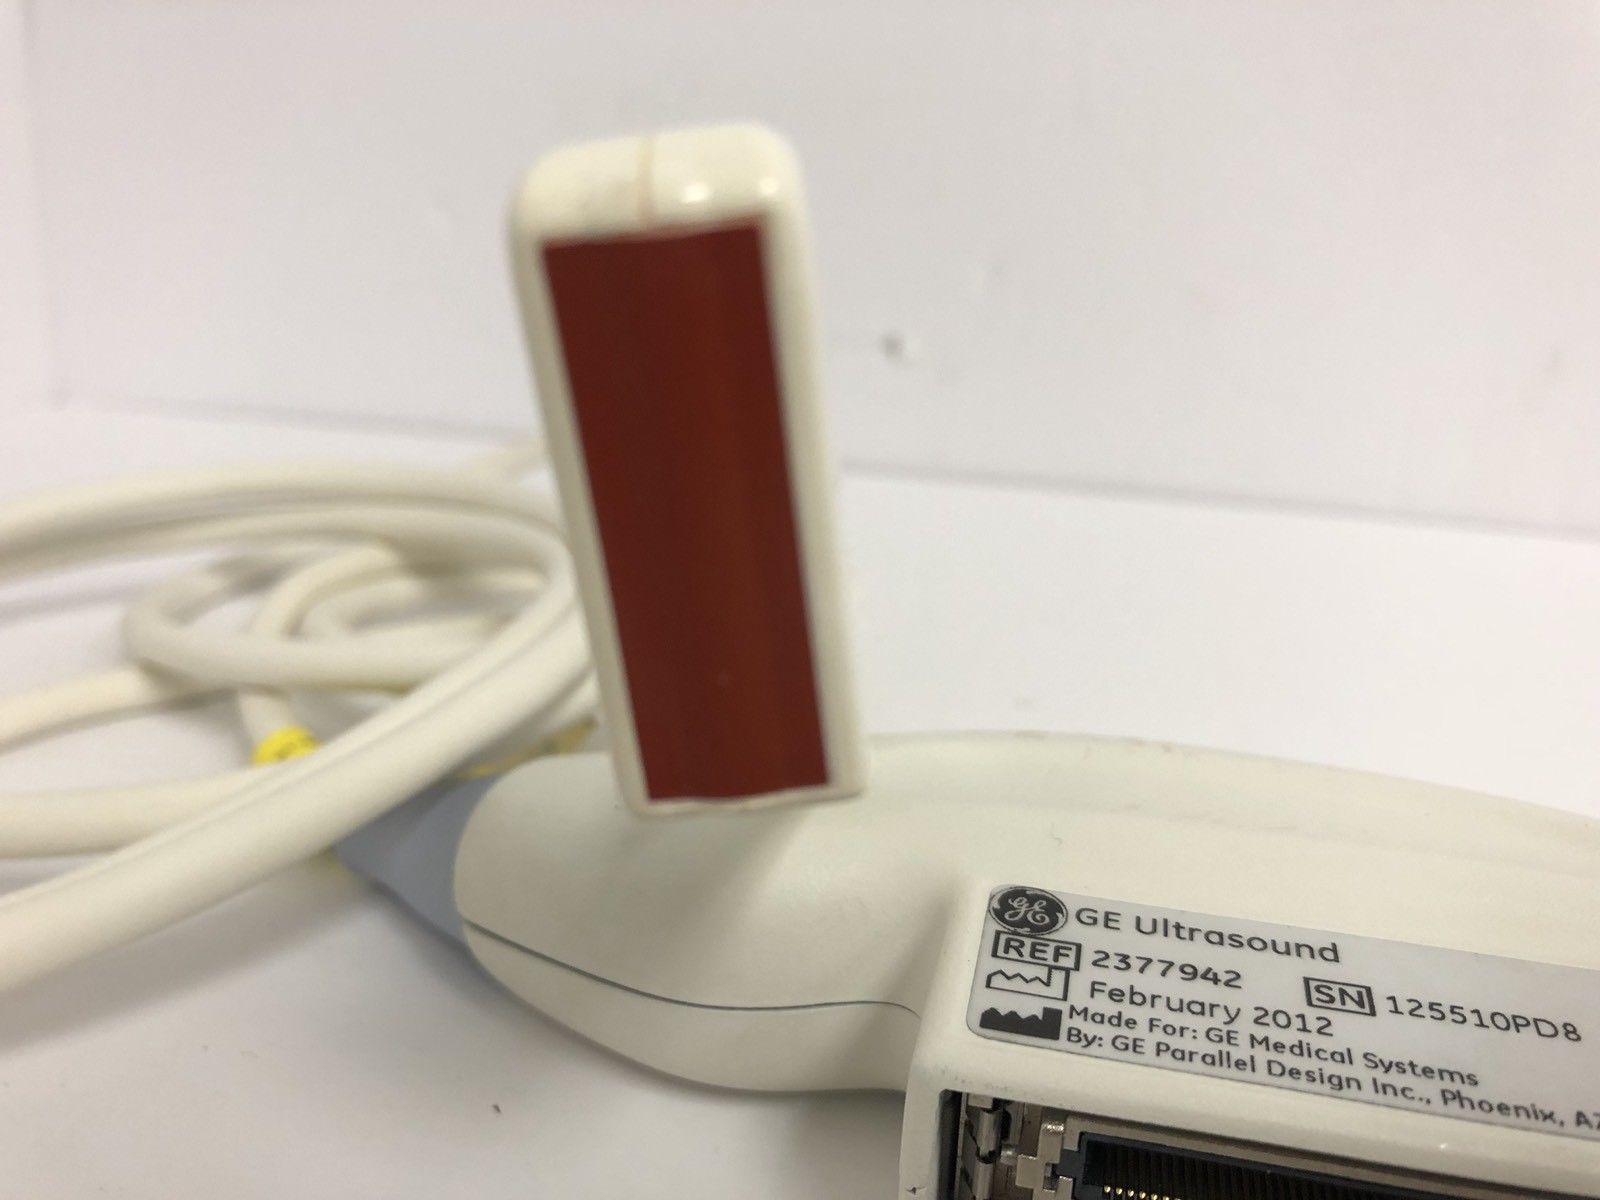 GE i12L-RS Ultrasound Probe Ref No 2377942 DOM February 2012 DIAGNOSTIC ULTRASOUND MACHINES FOR SALE